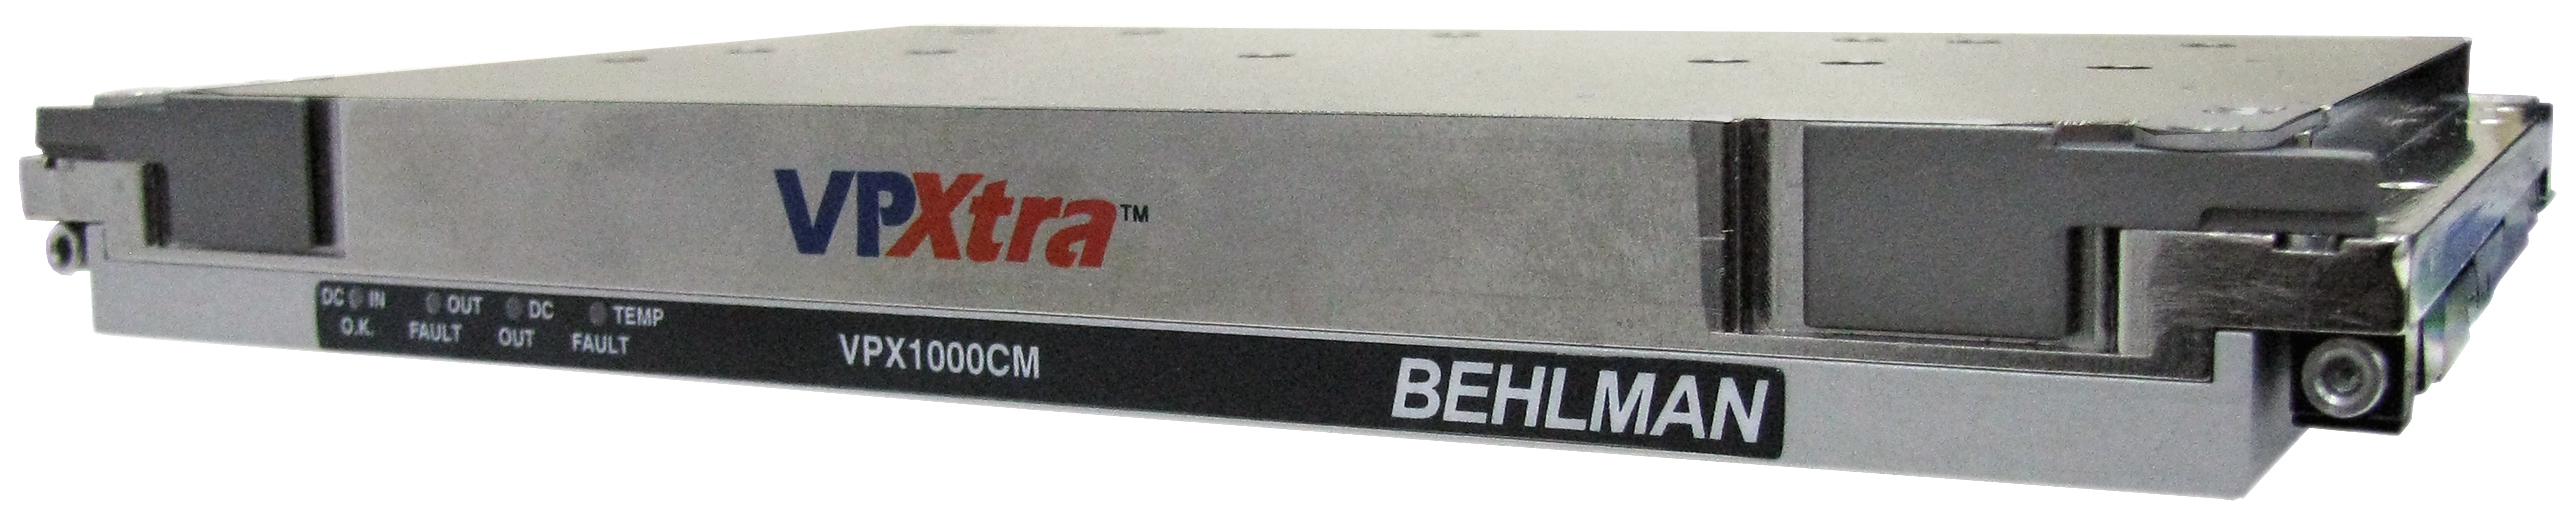 The Behlman VPXtra™ 1000CM COTS Power Supply is single-slot 6U , and OpenVPX compliant to ensure VPX rack compatibility. It delivers 700 Watts of DC power via 5 outputs. Its 12 VDC can be paralleled.